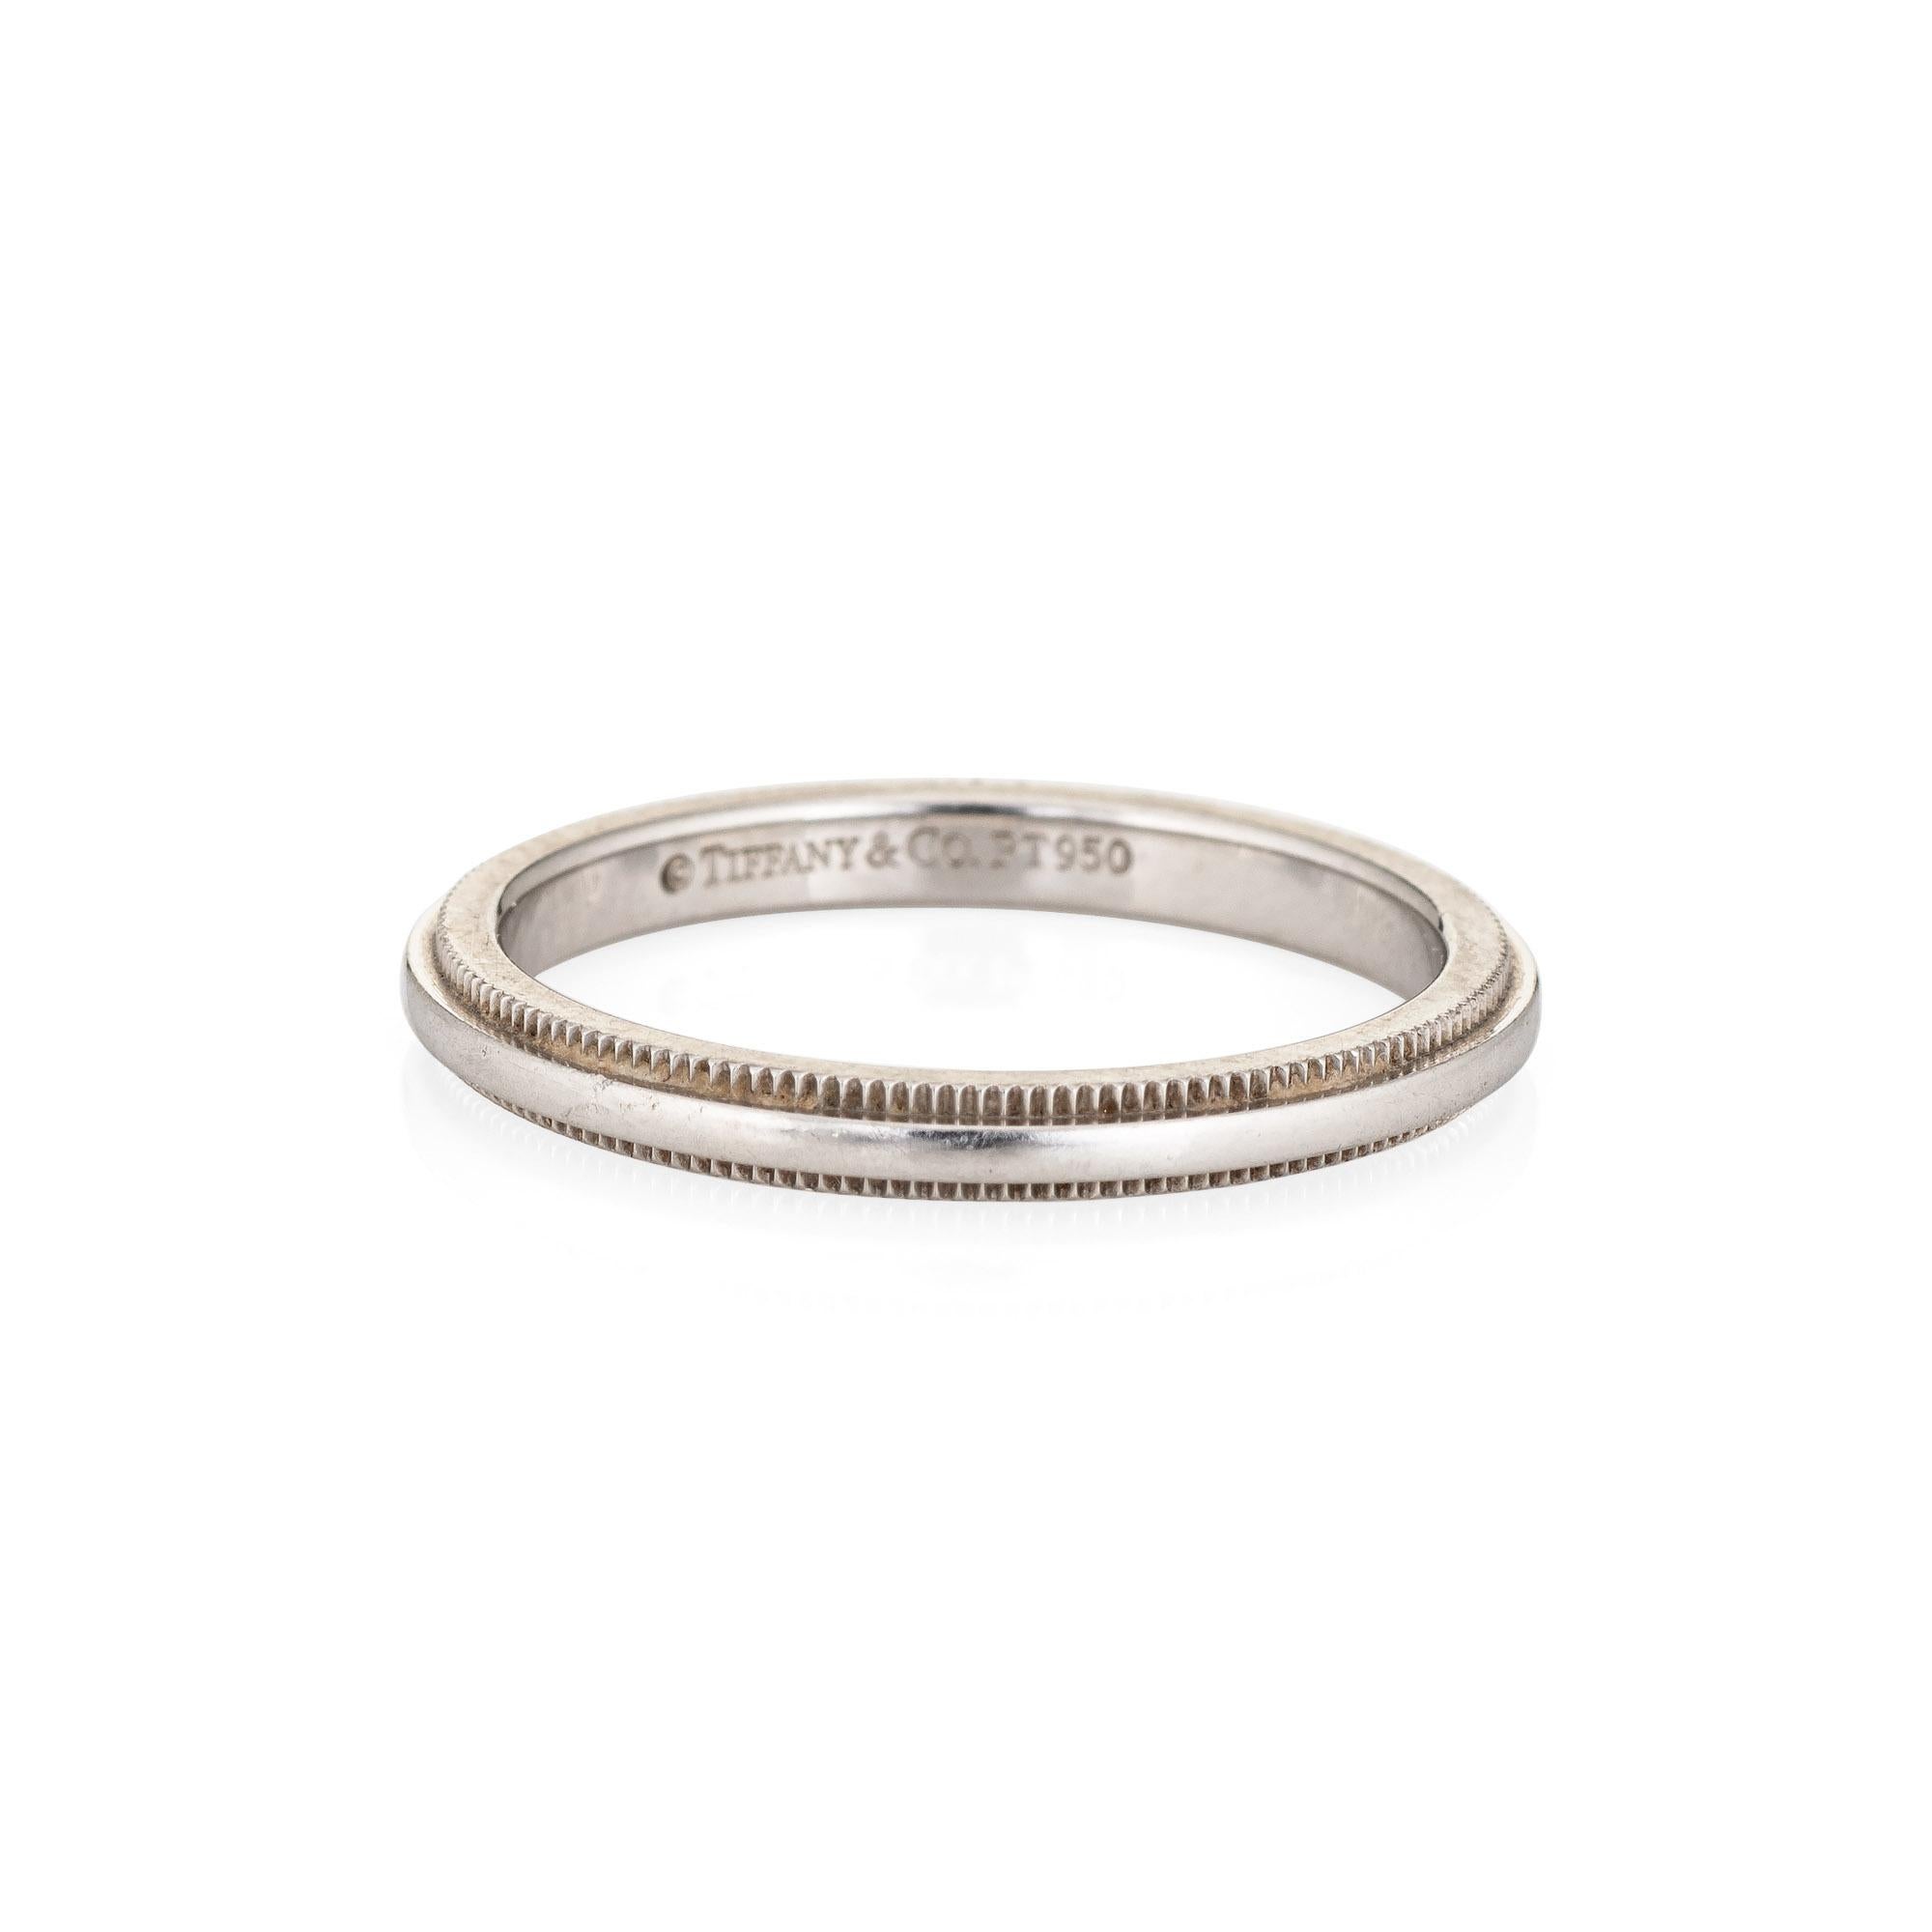 Pre-owned Tiffany & Co classic milgrain wedding band crafted in platinum (circa 2000s).  

The ring features textured milgrain edges. The 2mm band (0.07 inches) is great worn alone or stacked with your fine jewelry from any era.

The ring is in very